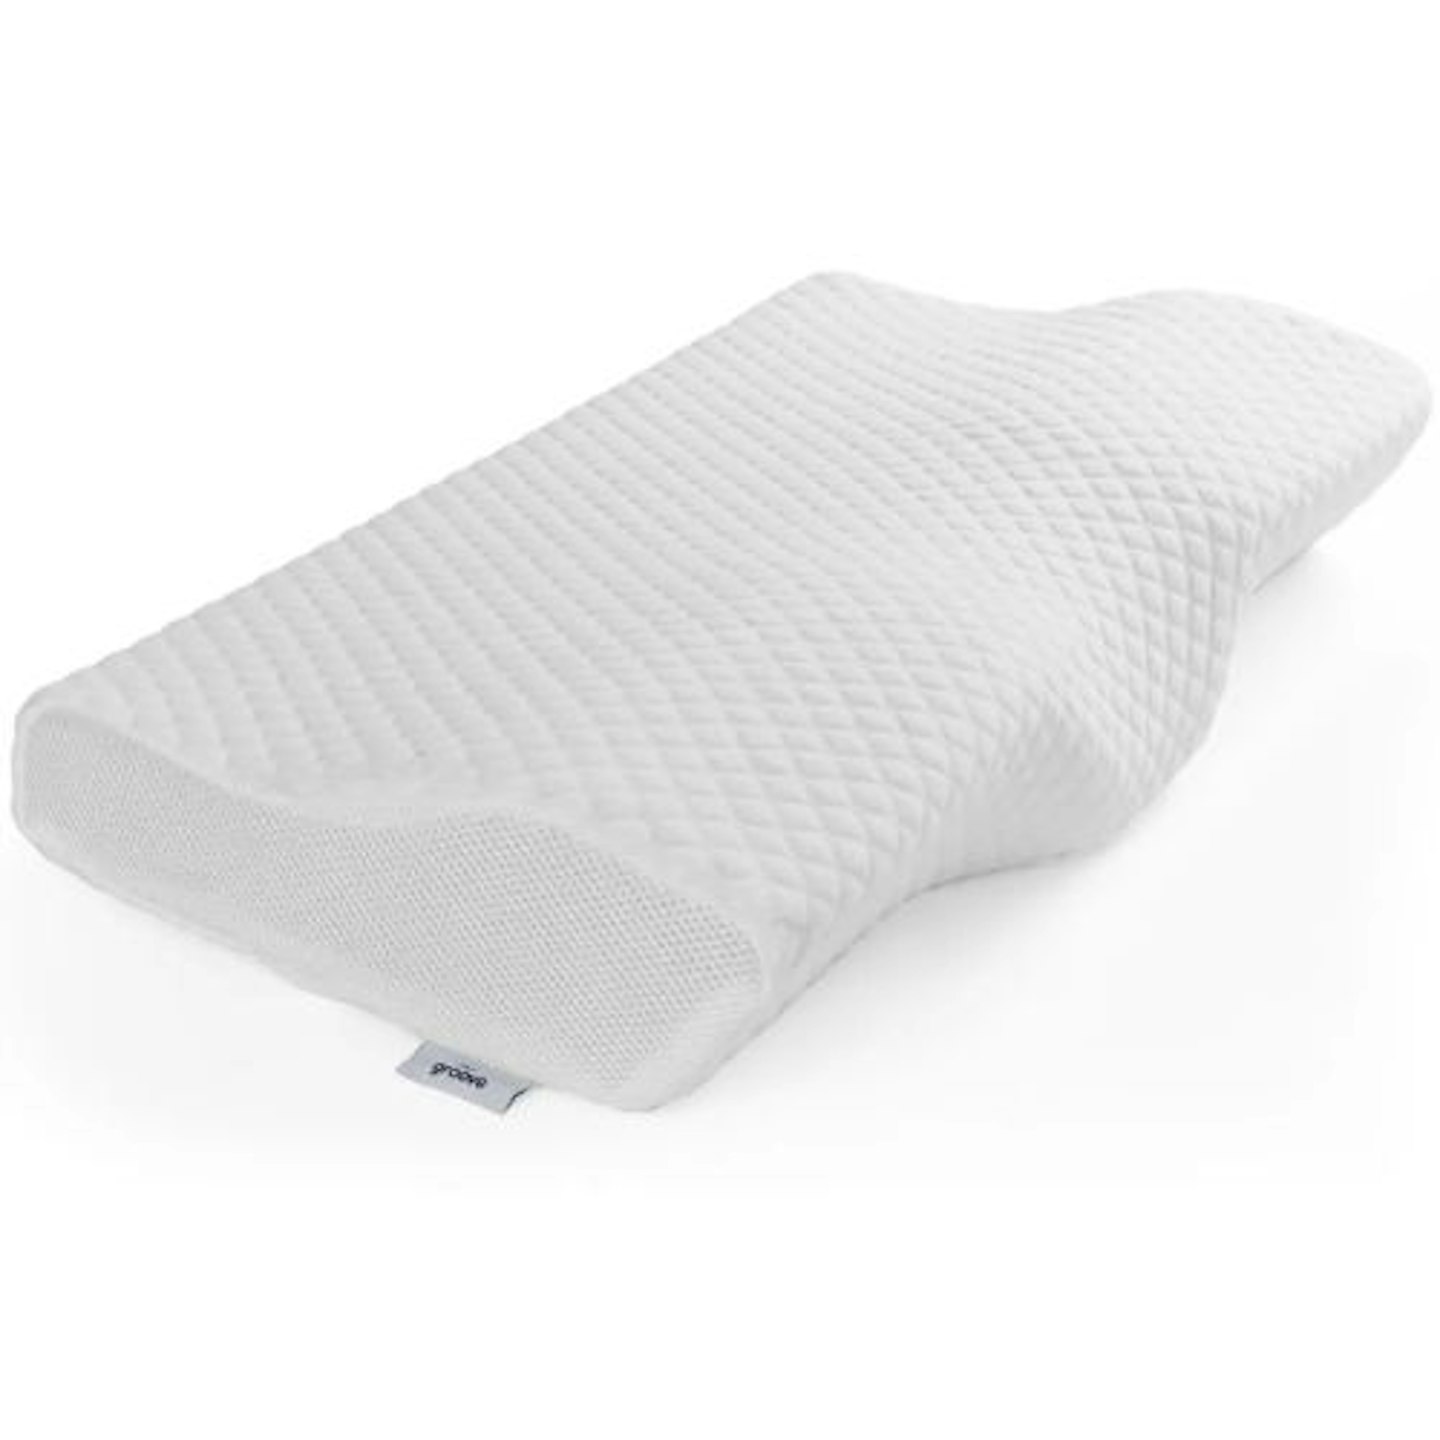 Groove Pain Relief Pillow